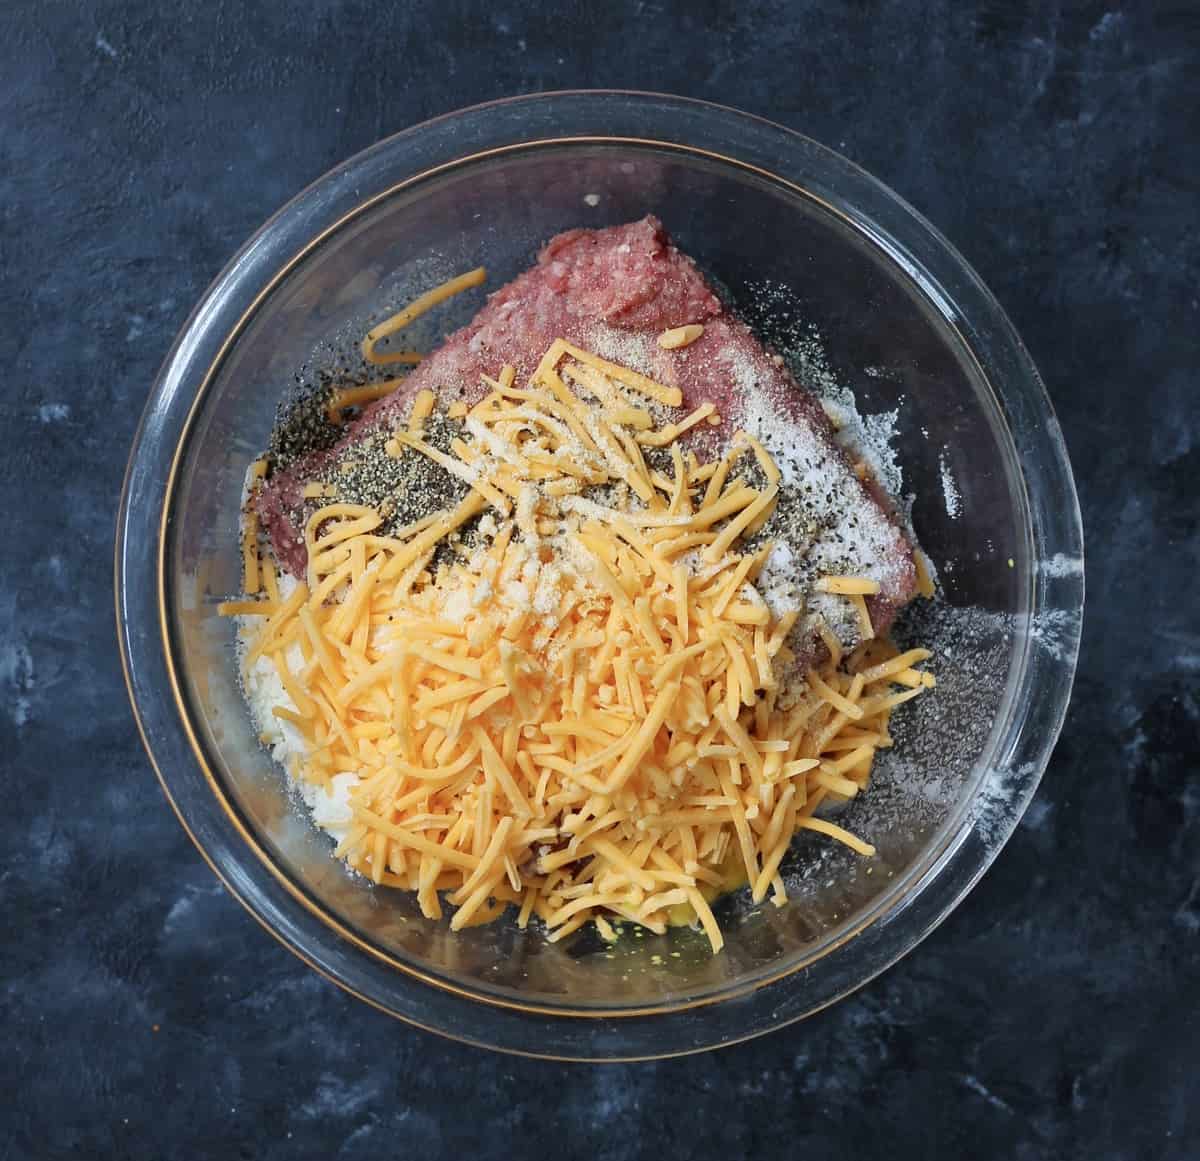 mini meatloaf recipe mix in a glass mixing bowl